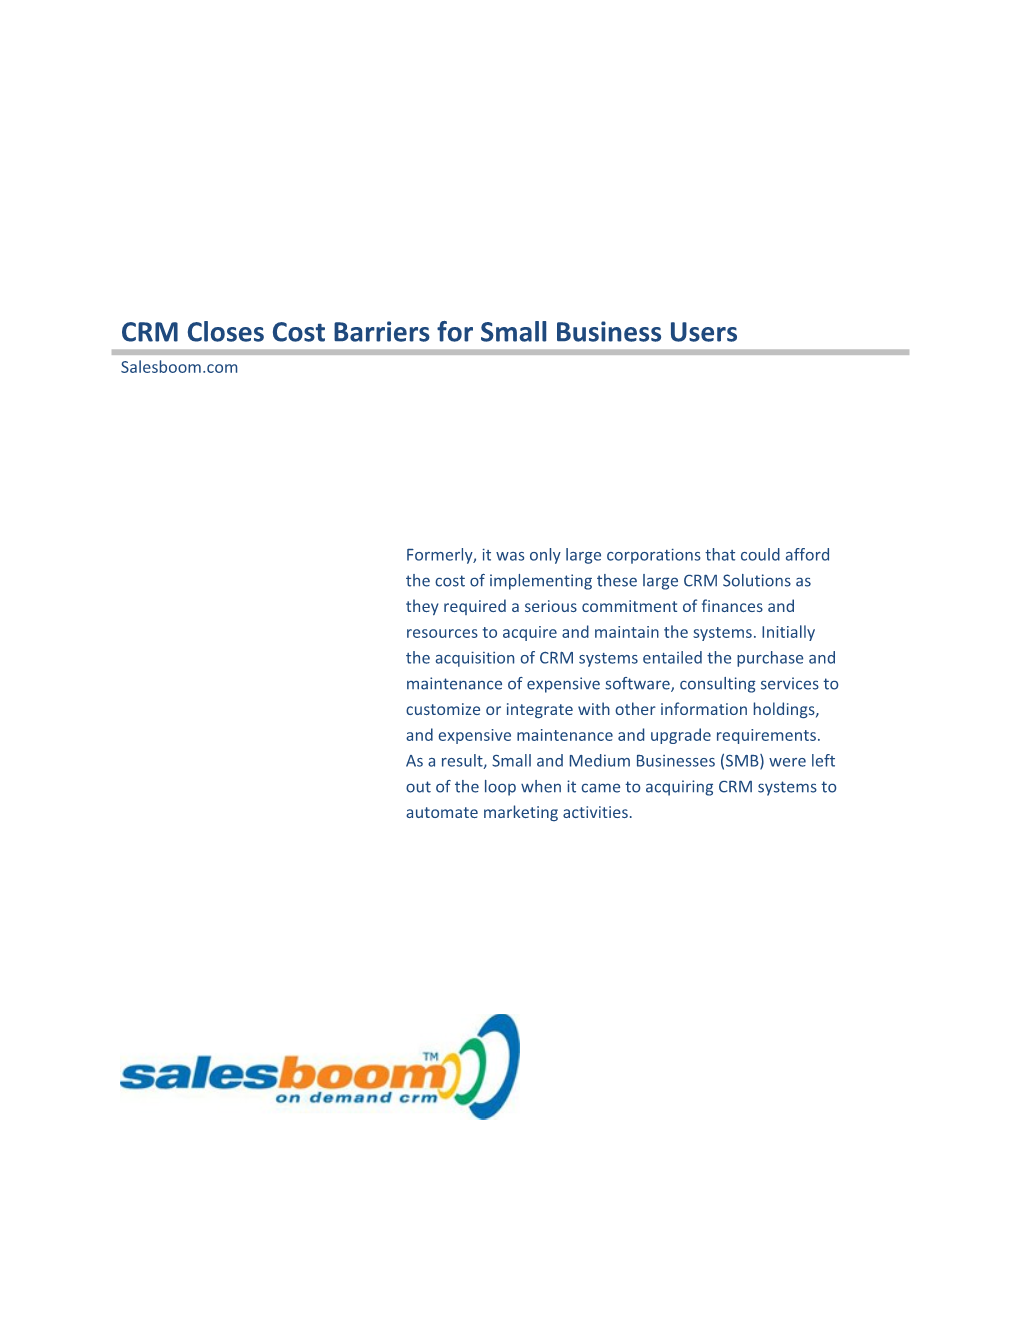 2.0 Traditional Small Business Management